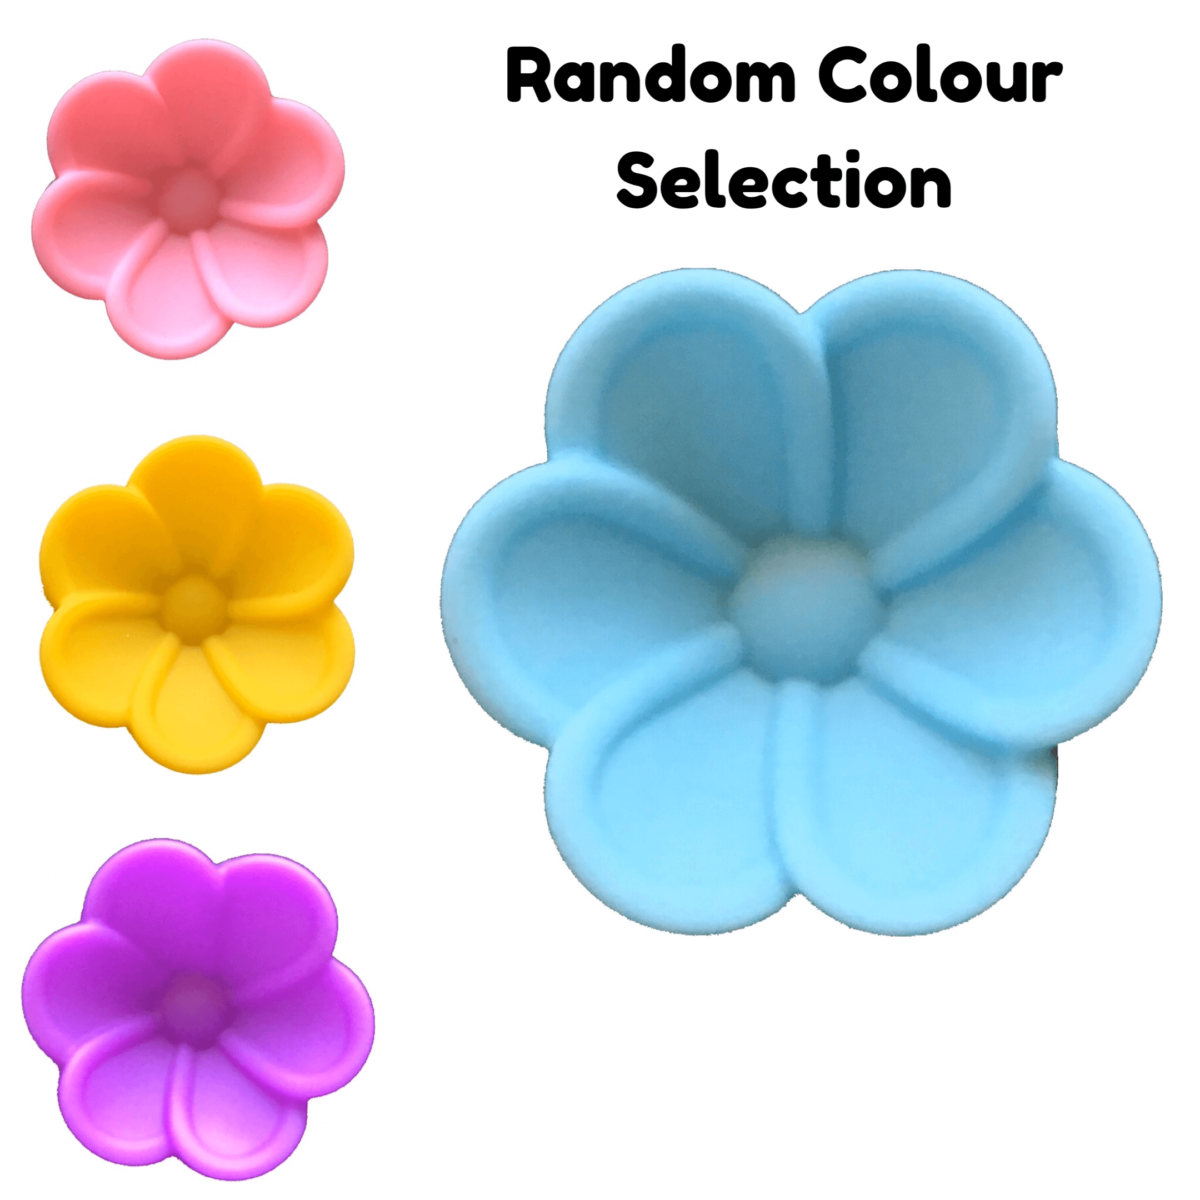 5cm begonia flower silicone moulds shown in pink, yellow, purple and blue with the text 'random colour selection'